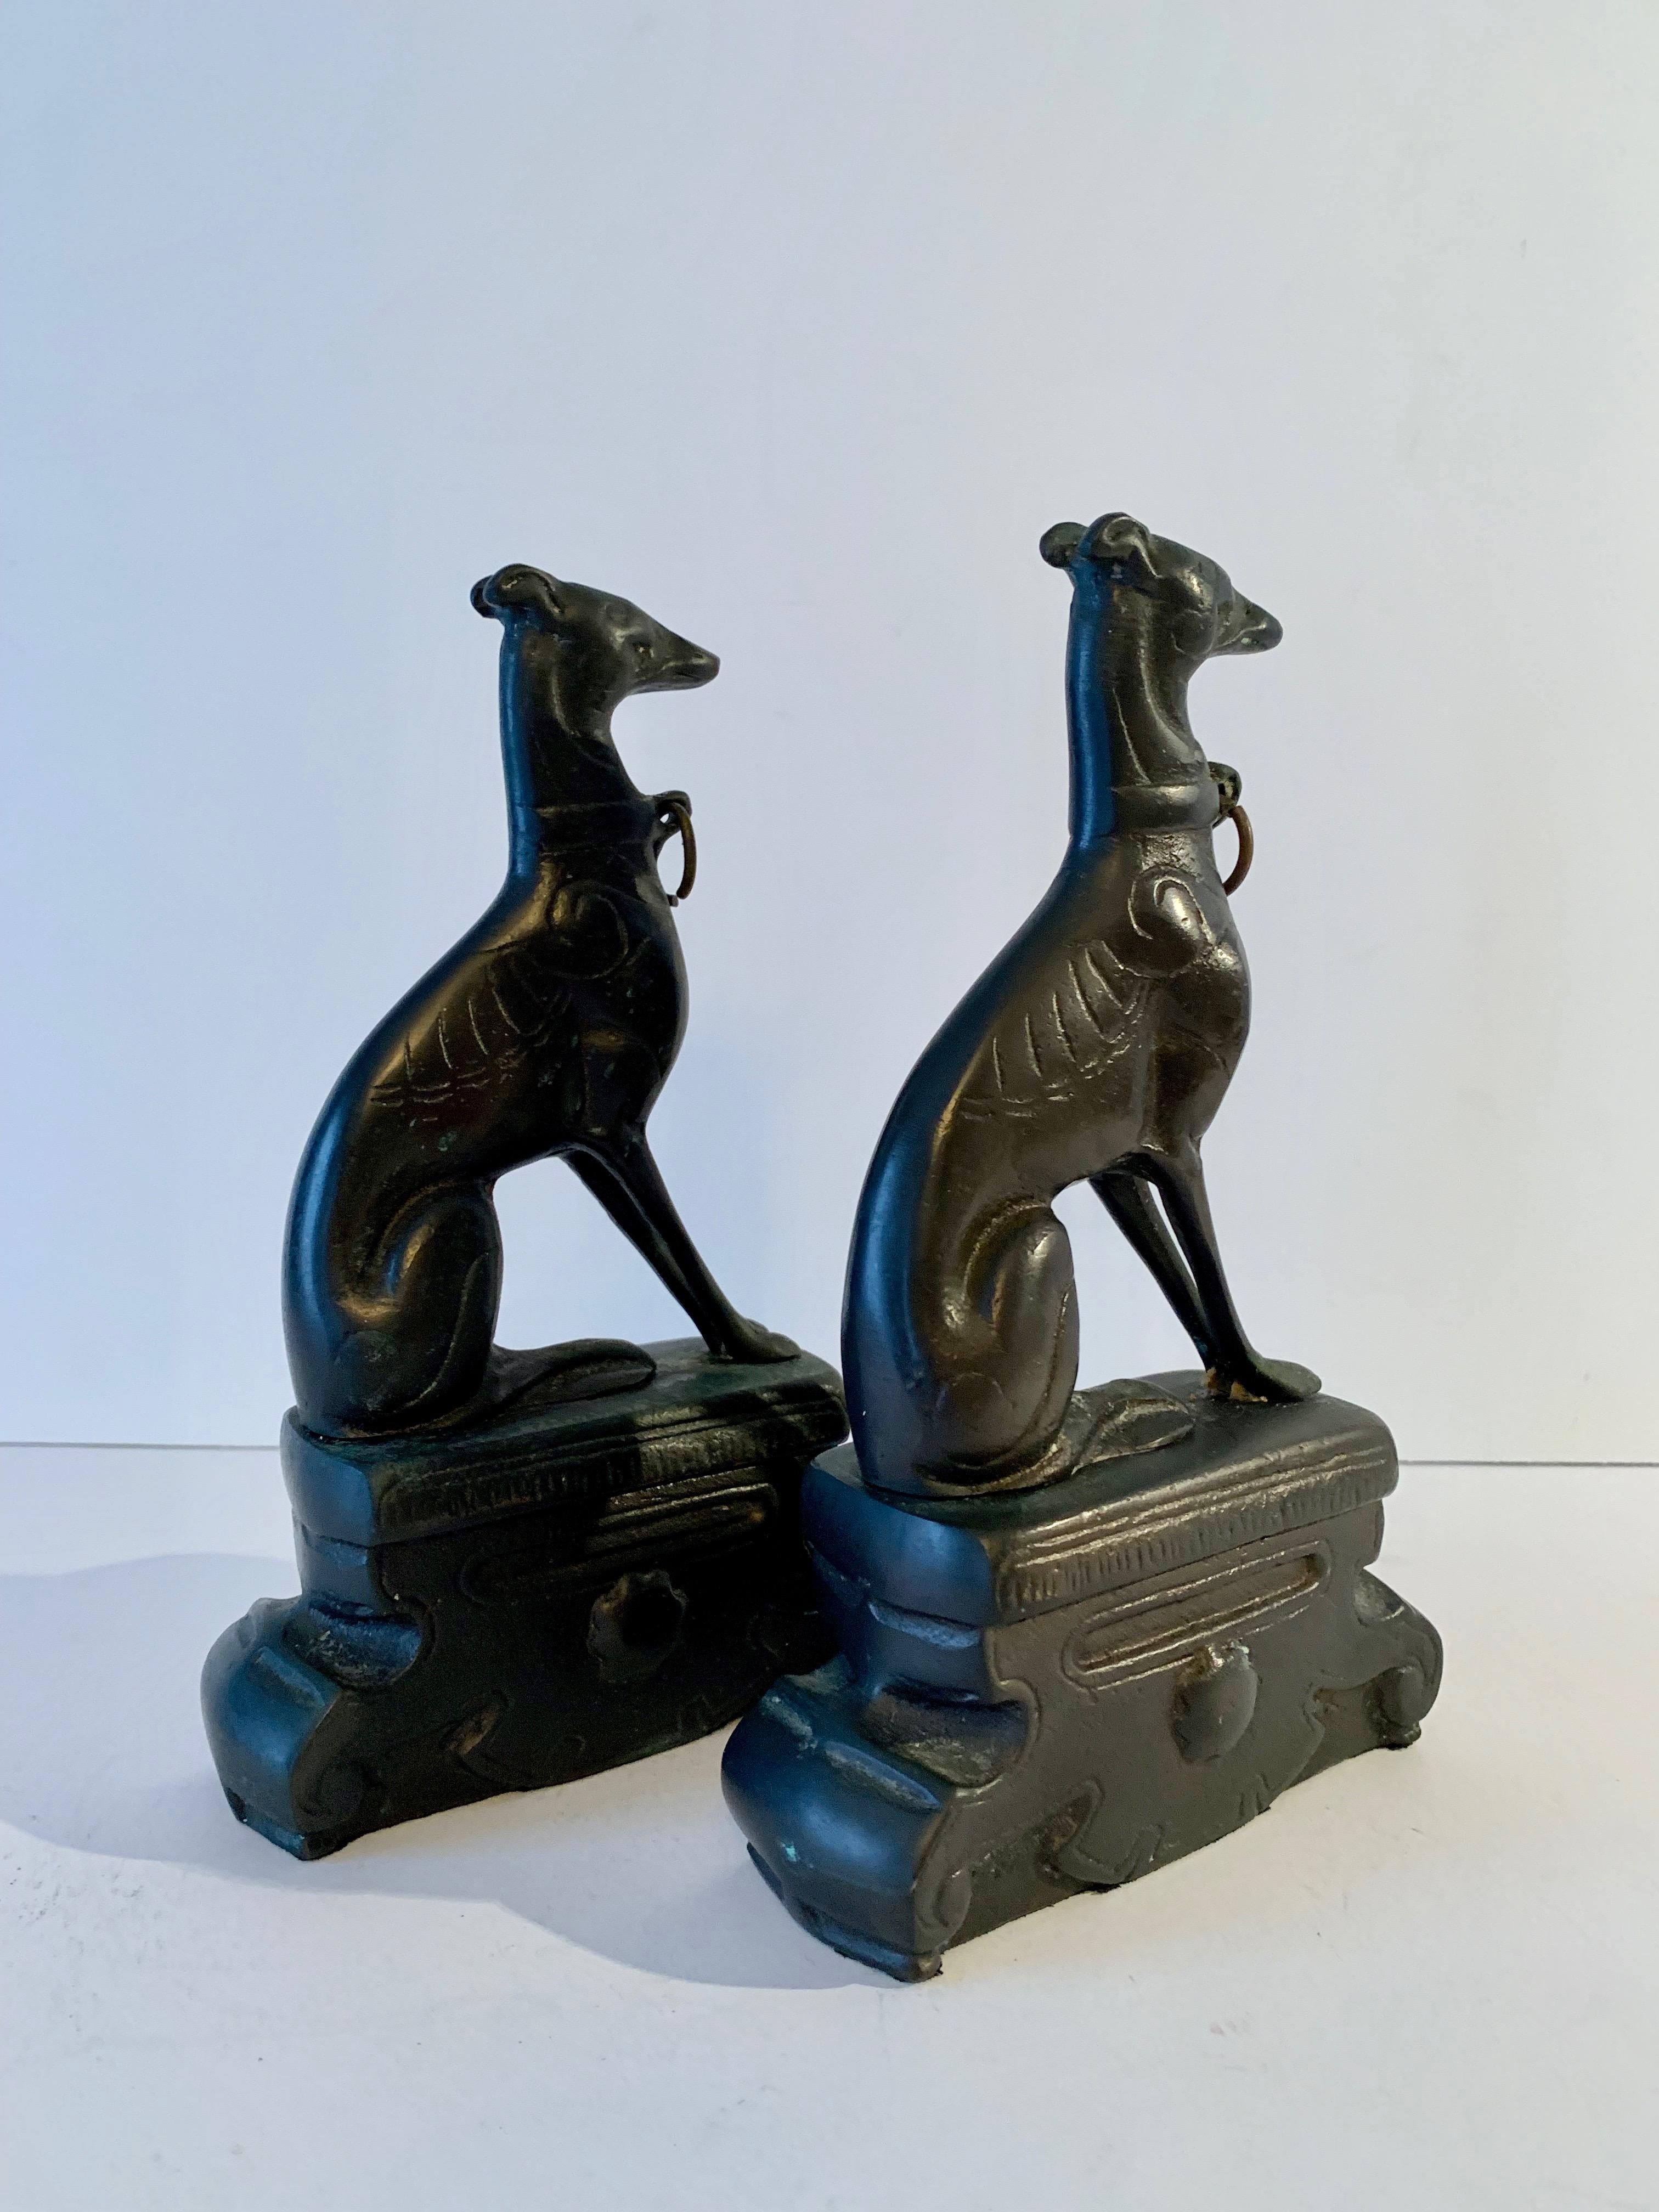 Pair of bronze Doberman Pincher dog bookends - a handsome pair. The profile and detailing are very nice and have a very sophisticated appeal... also great for the child’s room.